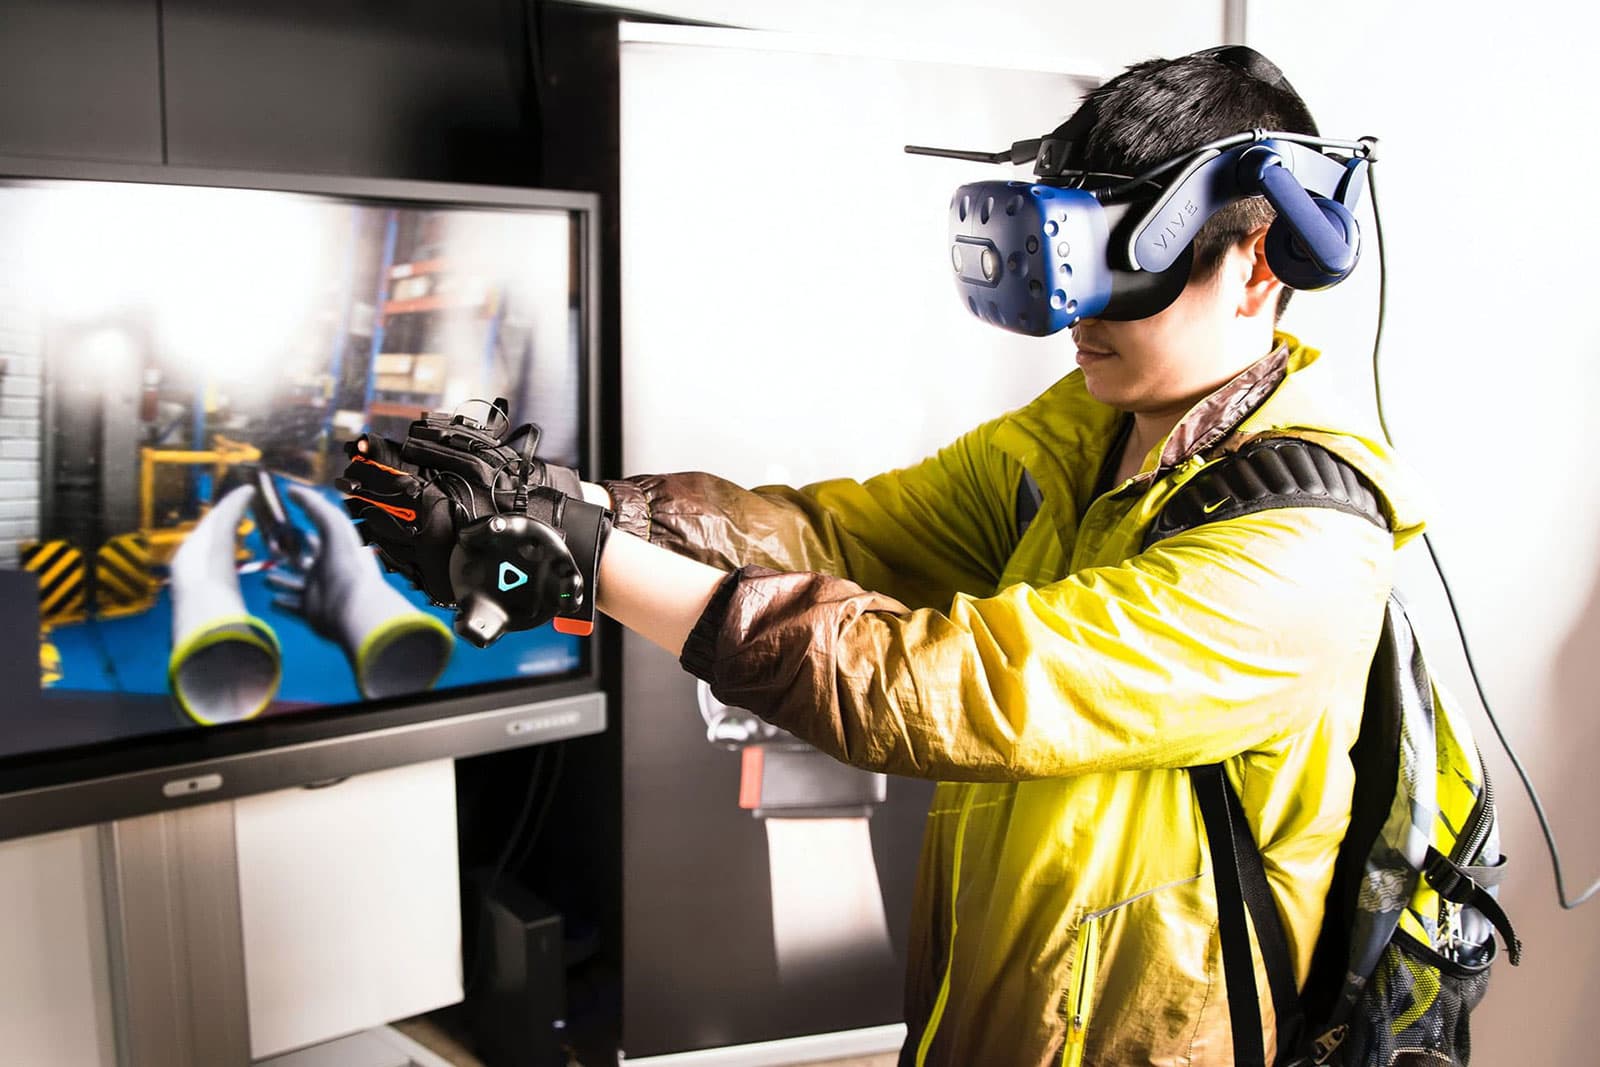 How can I train in Virtual Reality as a trainer in manual trades?